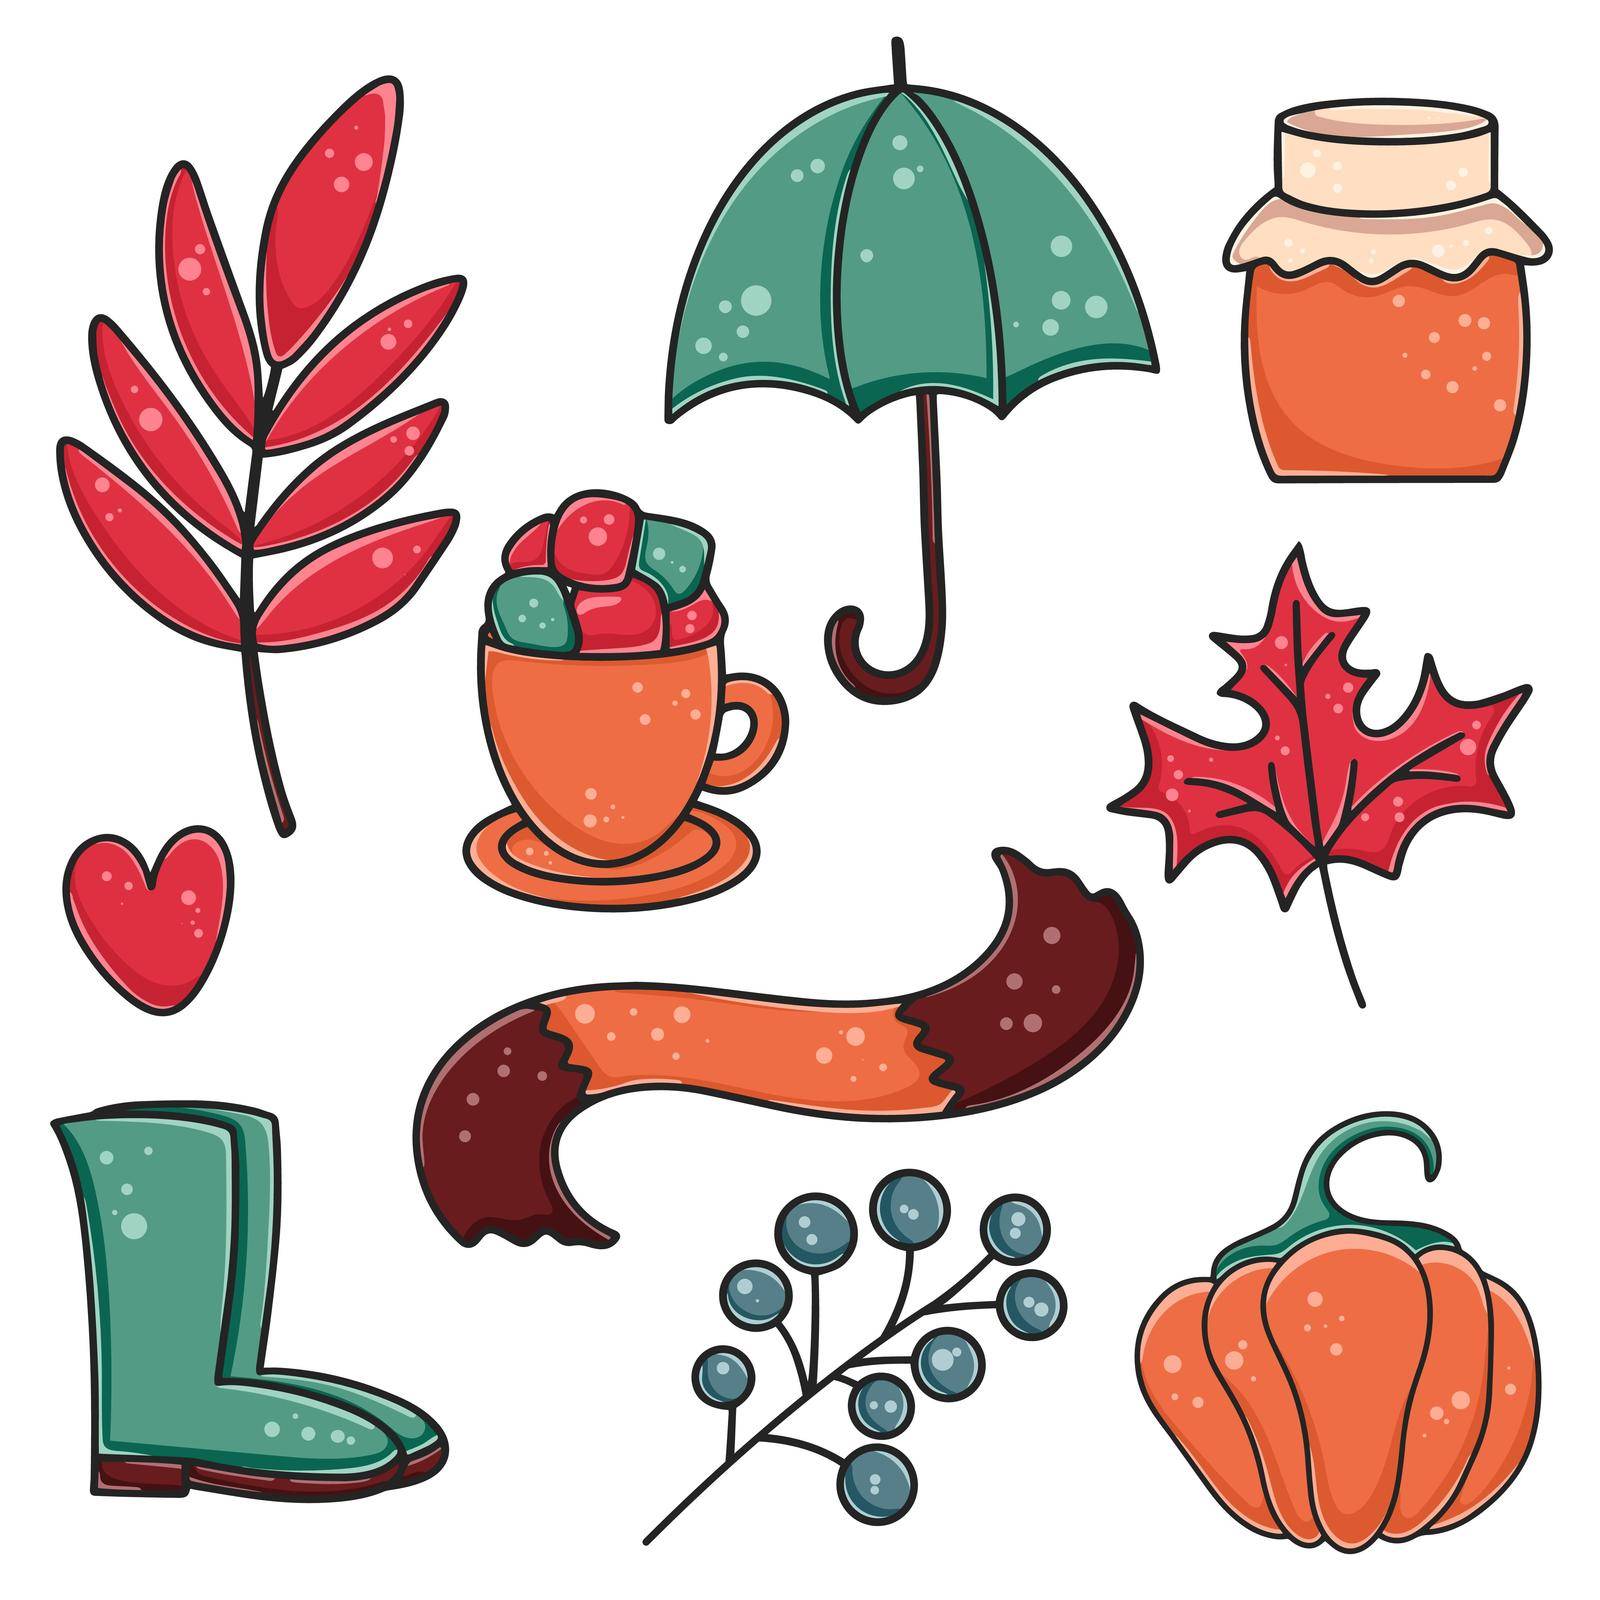 Autumn set of items for comfort. Bundle of umbrella, rubber boots, scarf, honey, pumpkin, maple leaf, berries, coffee with marshmallows. Hand drawn fall seasonal isolated elements vector illustration